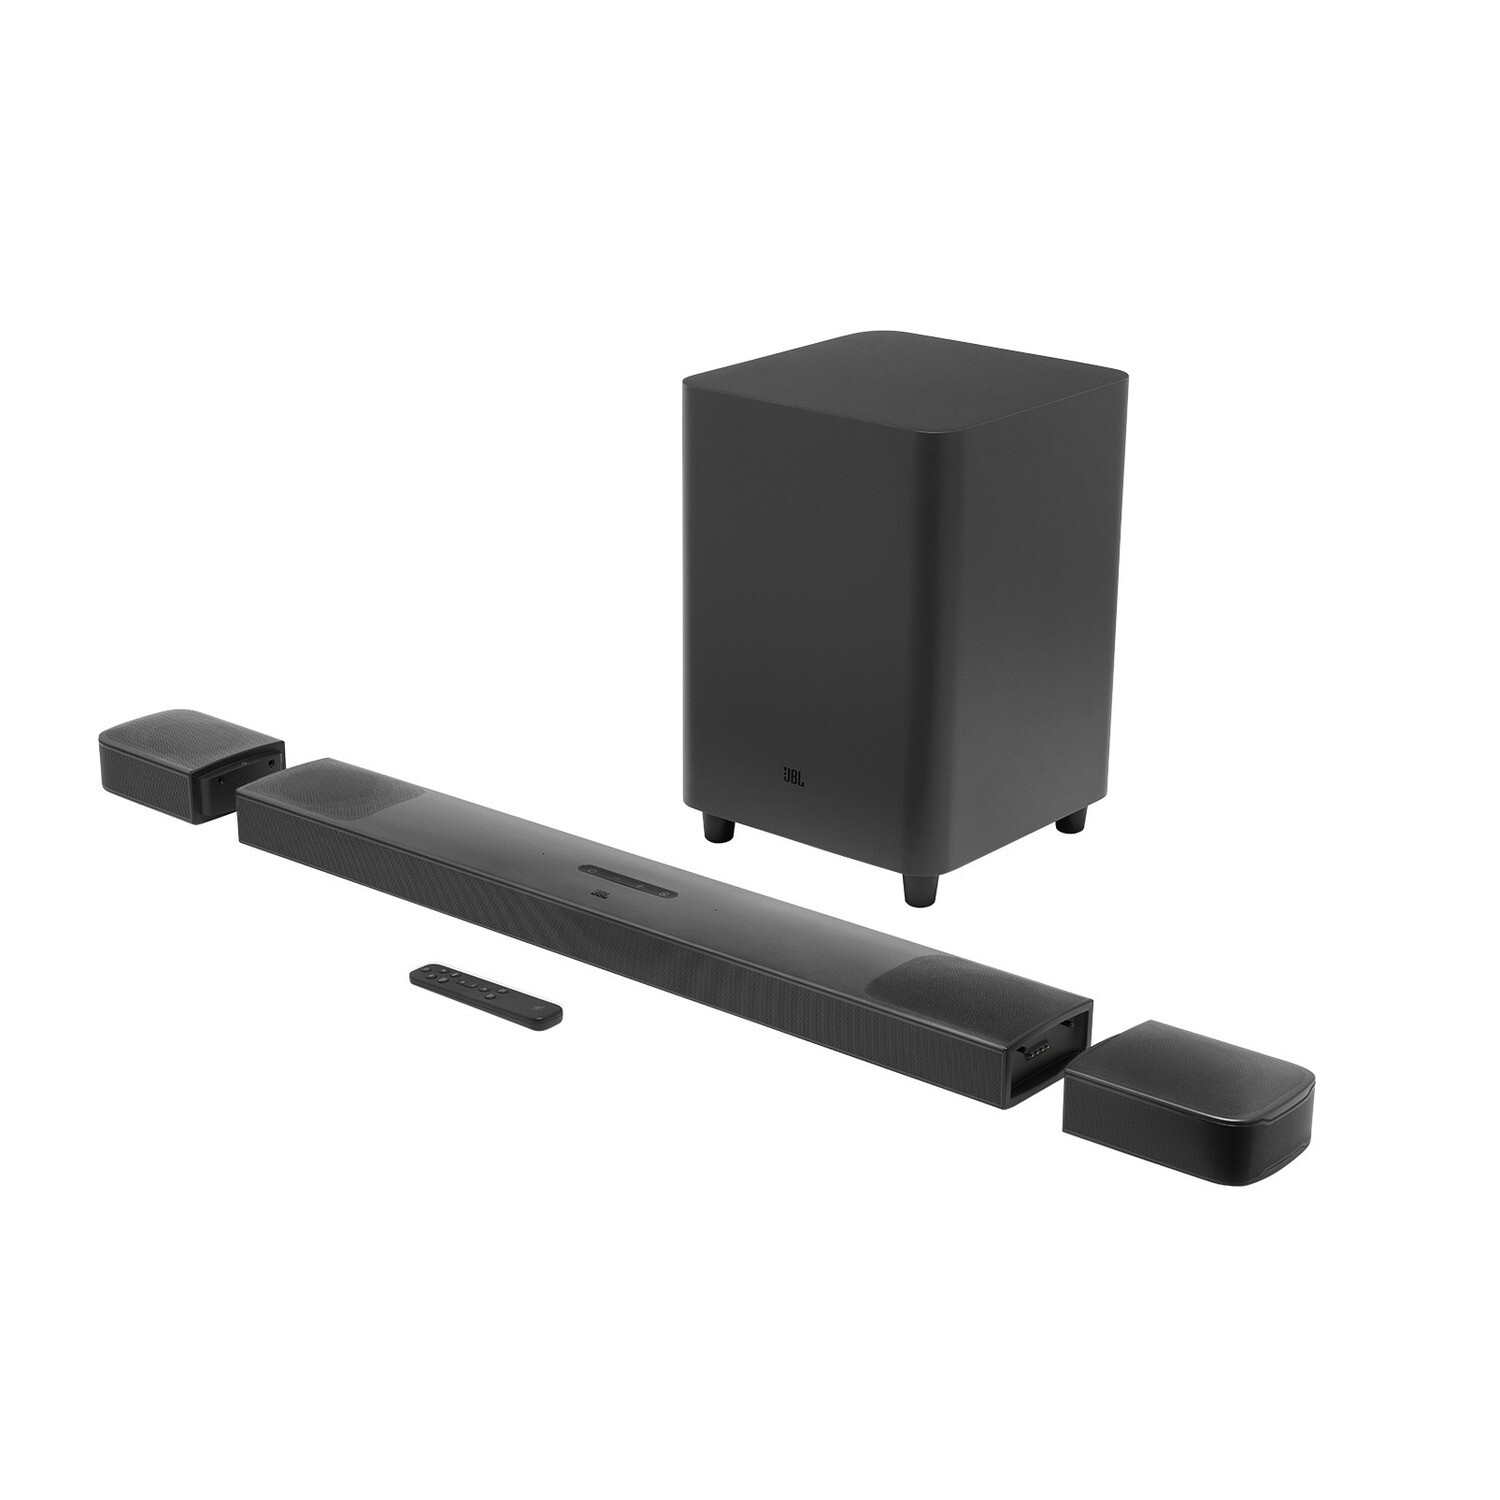 JBL BAR 9.1 True Wireless Surround with Dolby Atmos® - 9.1 Channel Soundbar System with Surround Speakers and Dolby Atmos®